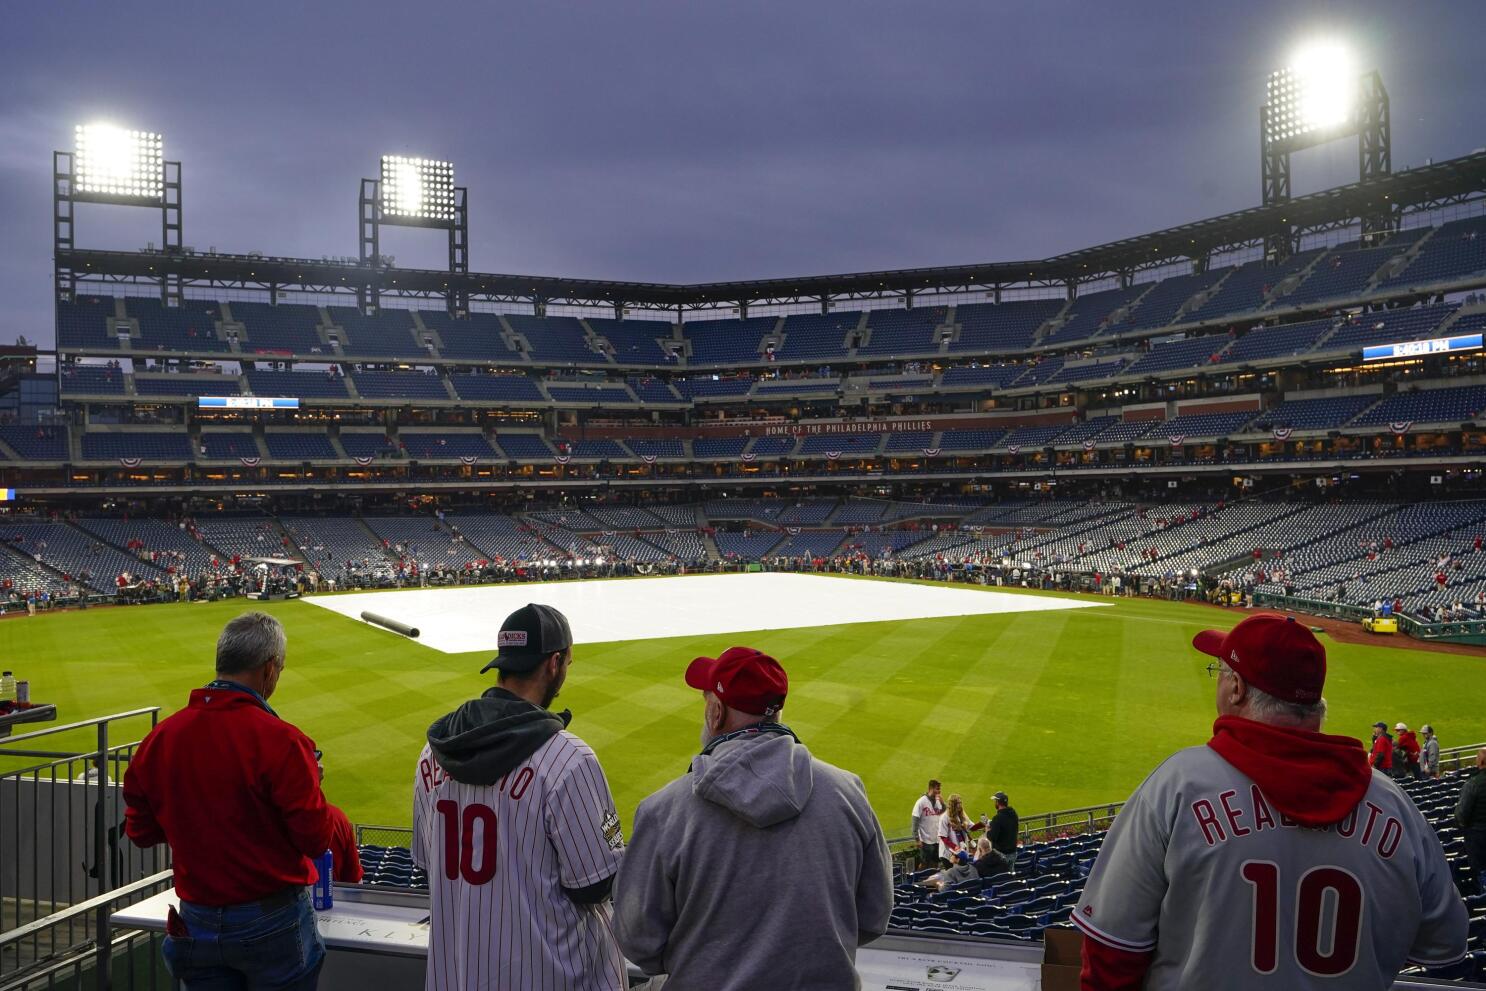 2008 World Series Game 5, and all the rain that delayed the Phillies' reign